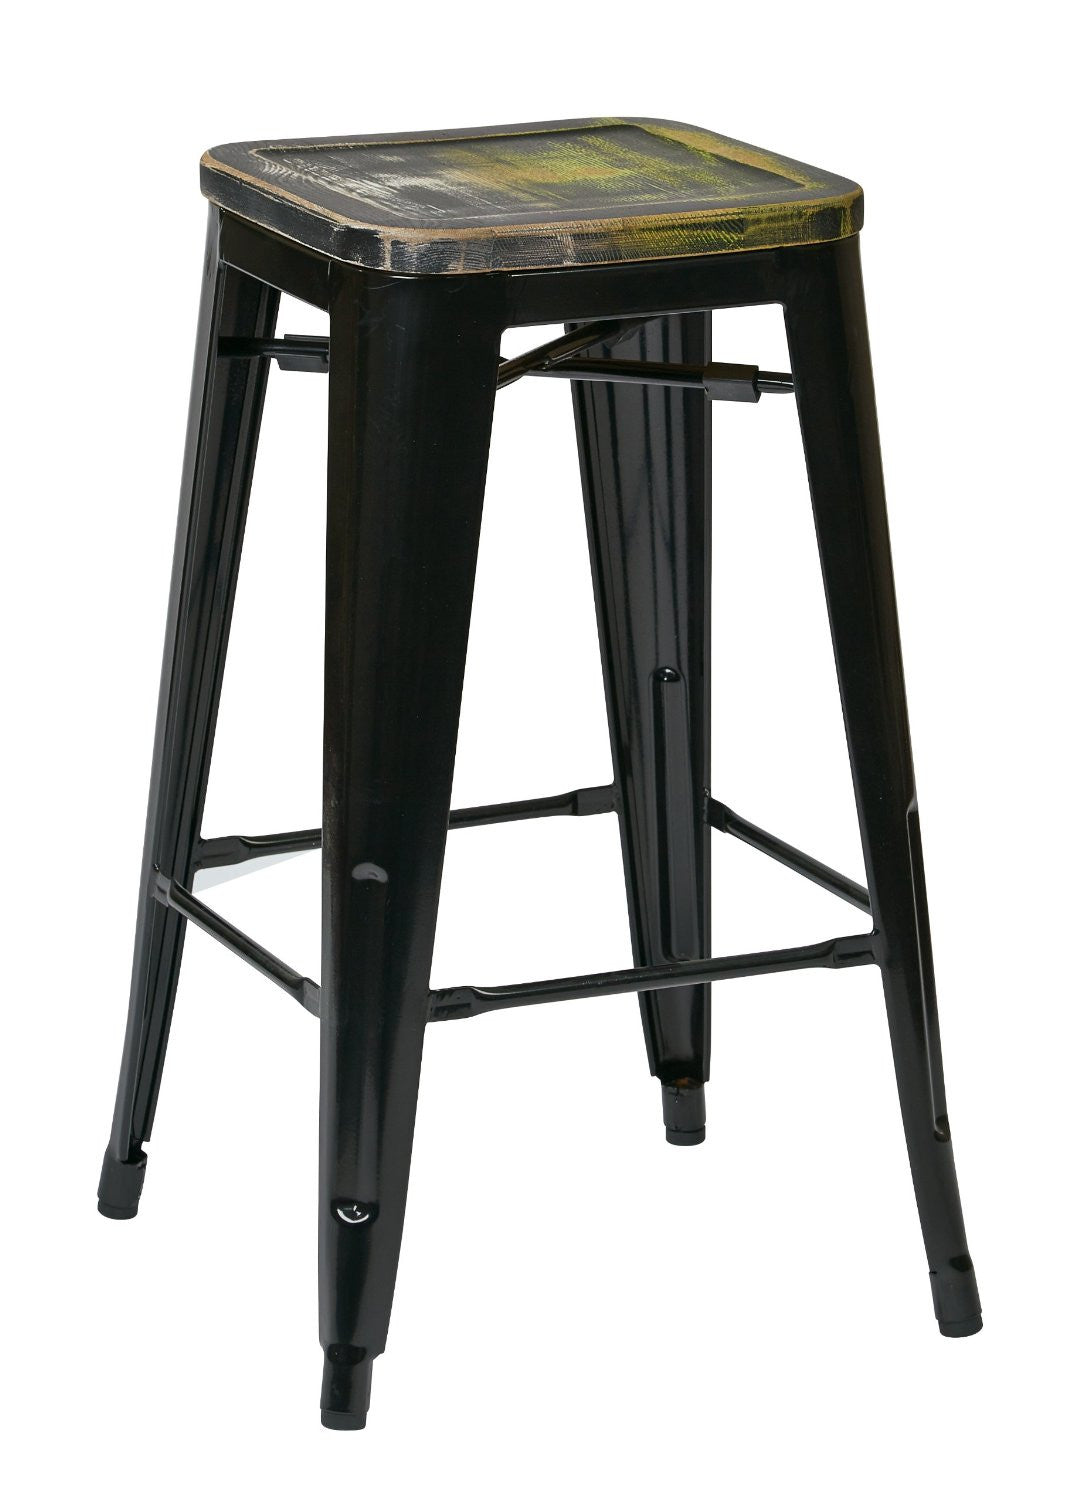 Osp Designs Brw31263a2-c307 Bristow 26" Antique Metal Barstool With Vintage Wood Seat, Black Finish Frame & Pine Alice Finish Seat, 2 Pack